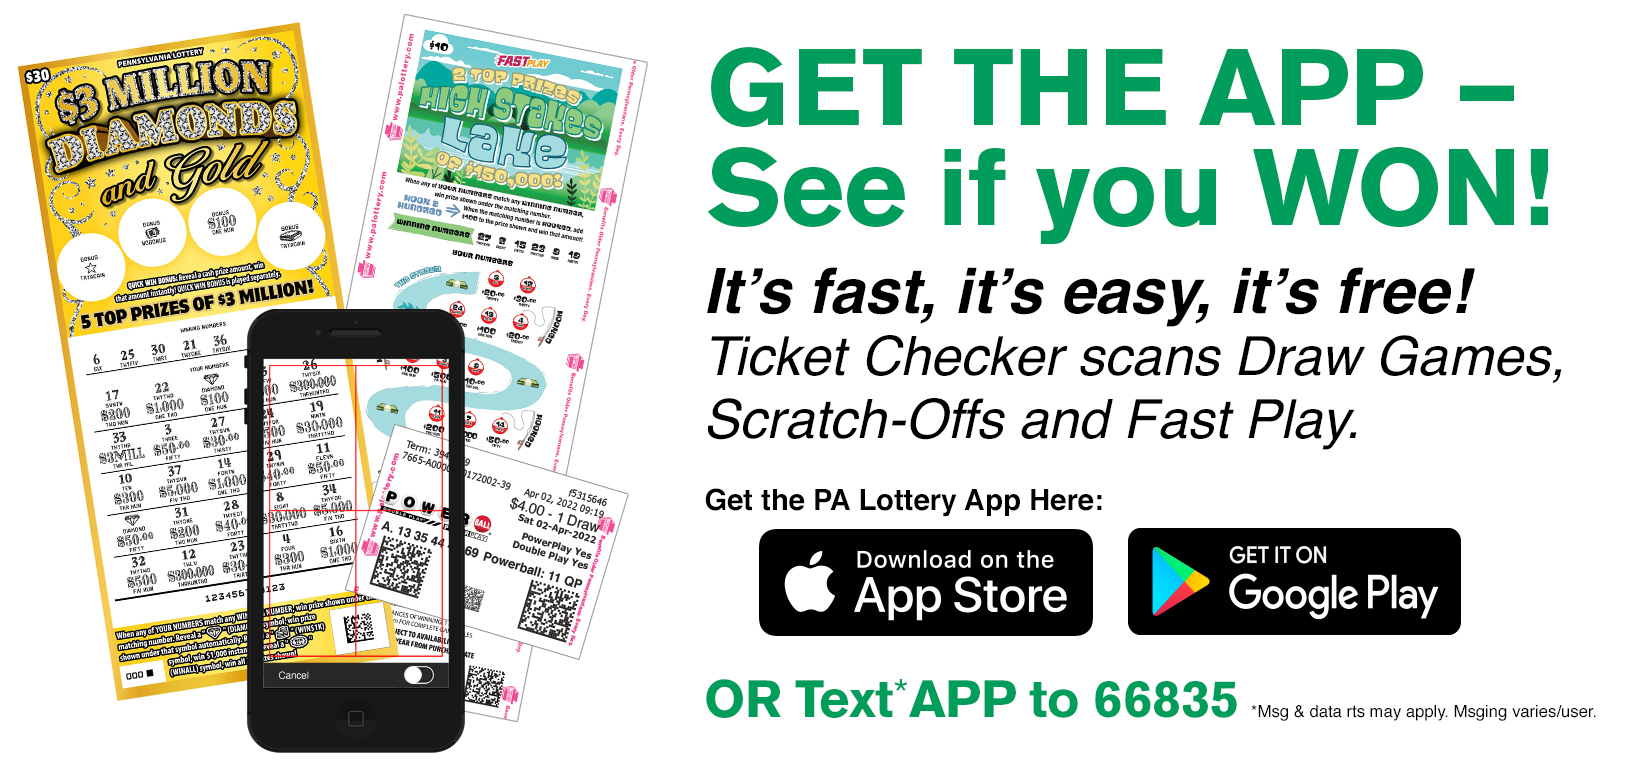 Ticket Checker, Use the App to See if You Won!